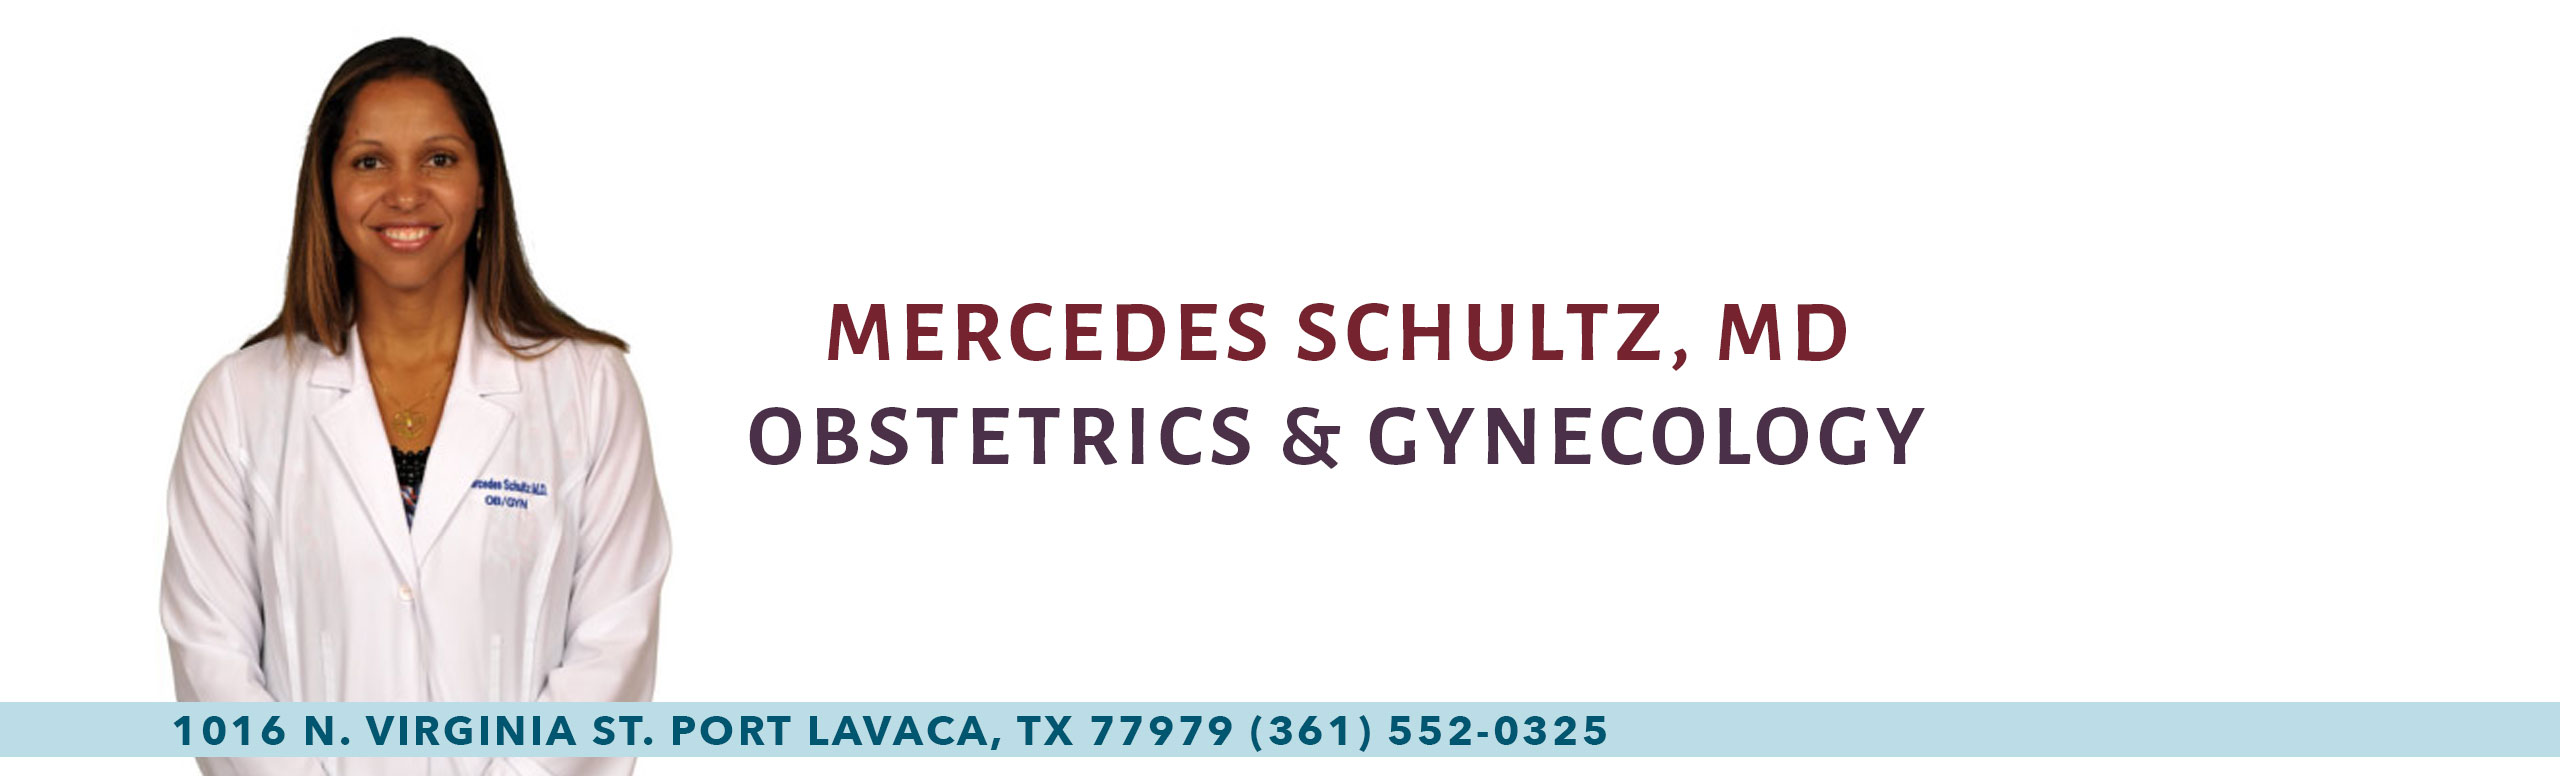 Banner picture of Mercedes Schultz, MD
Obstetrics & Gynecology